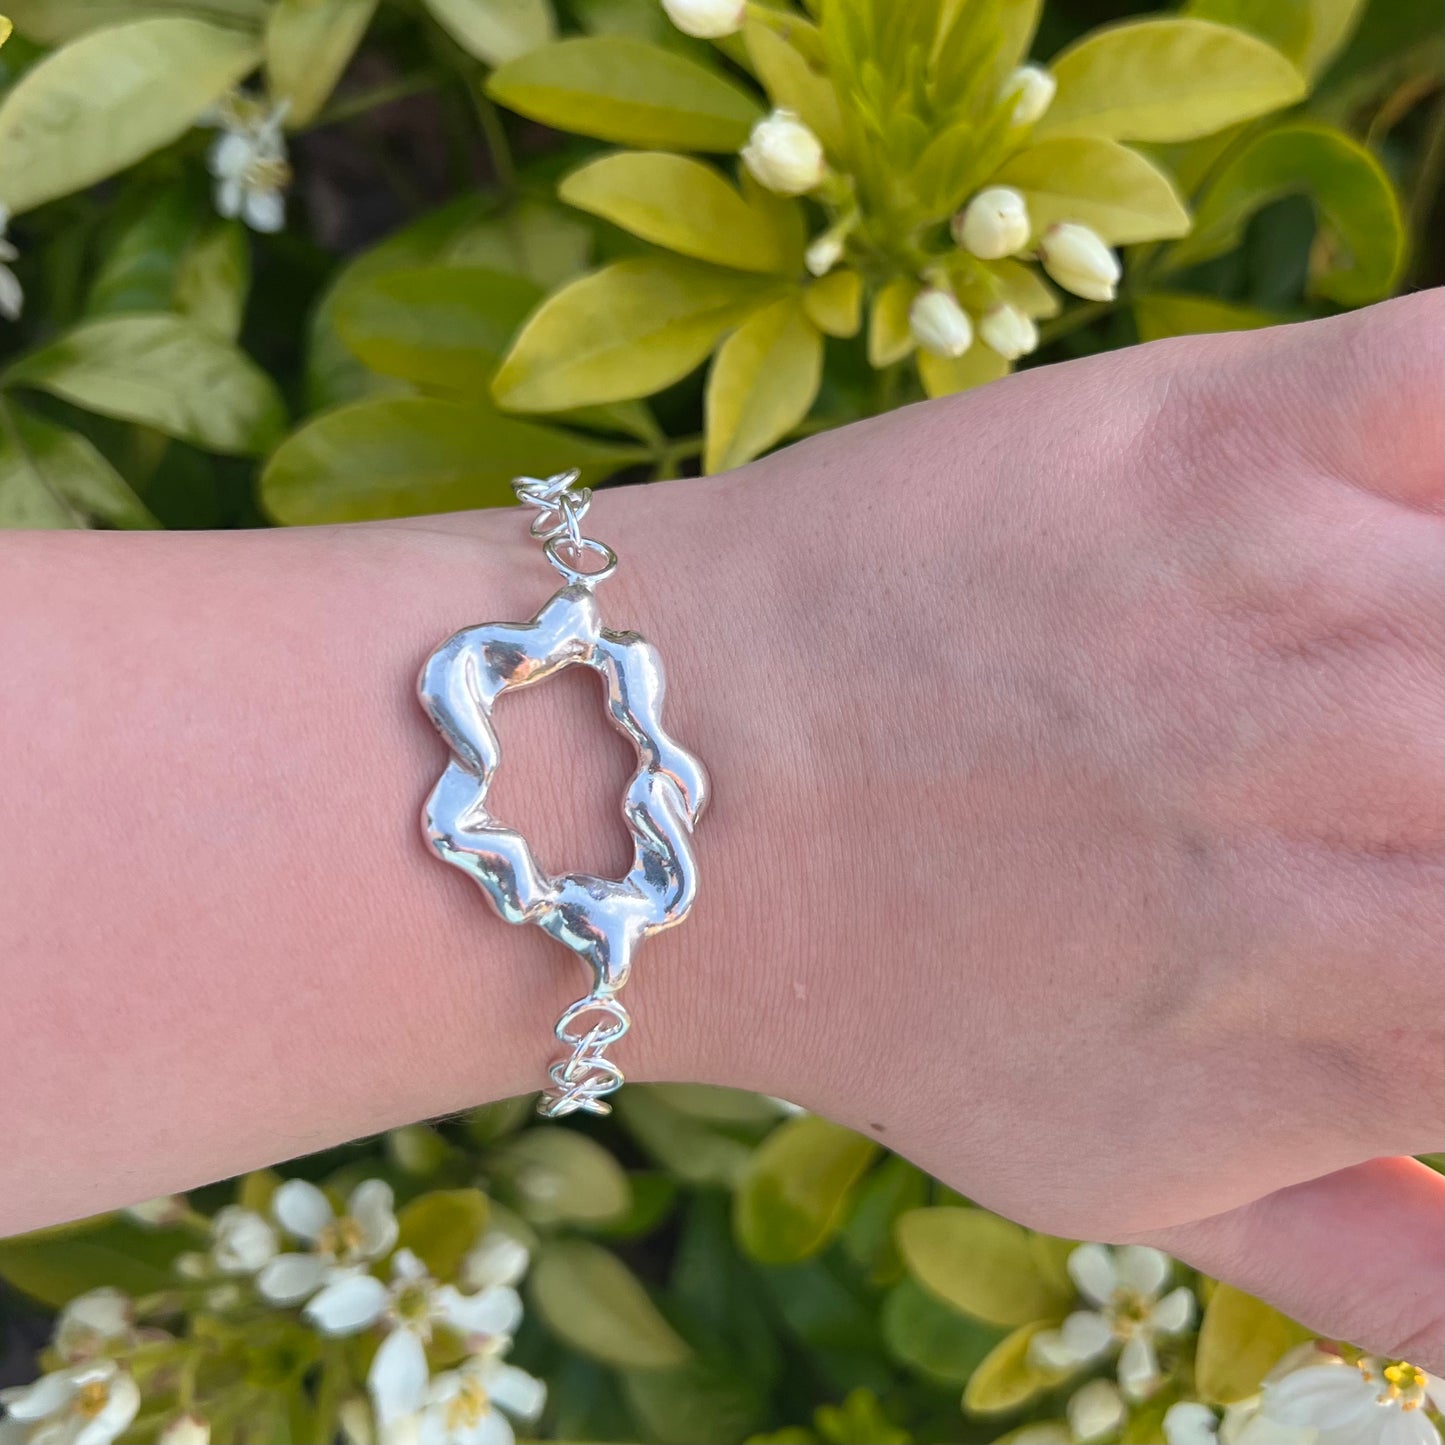 A chunky sterling silver bracelet on a wrist. The centrepiece of the bracelet is shaped like a cloud and the background is of a green shrub with white flowers.